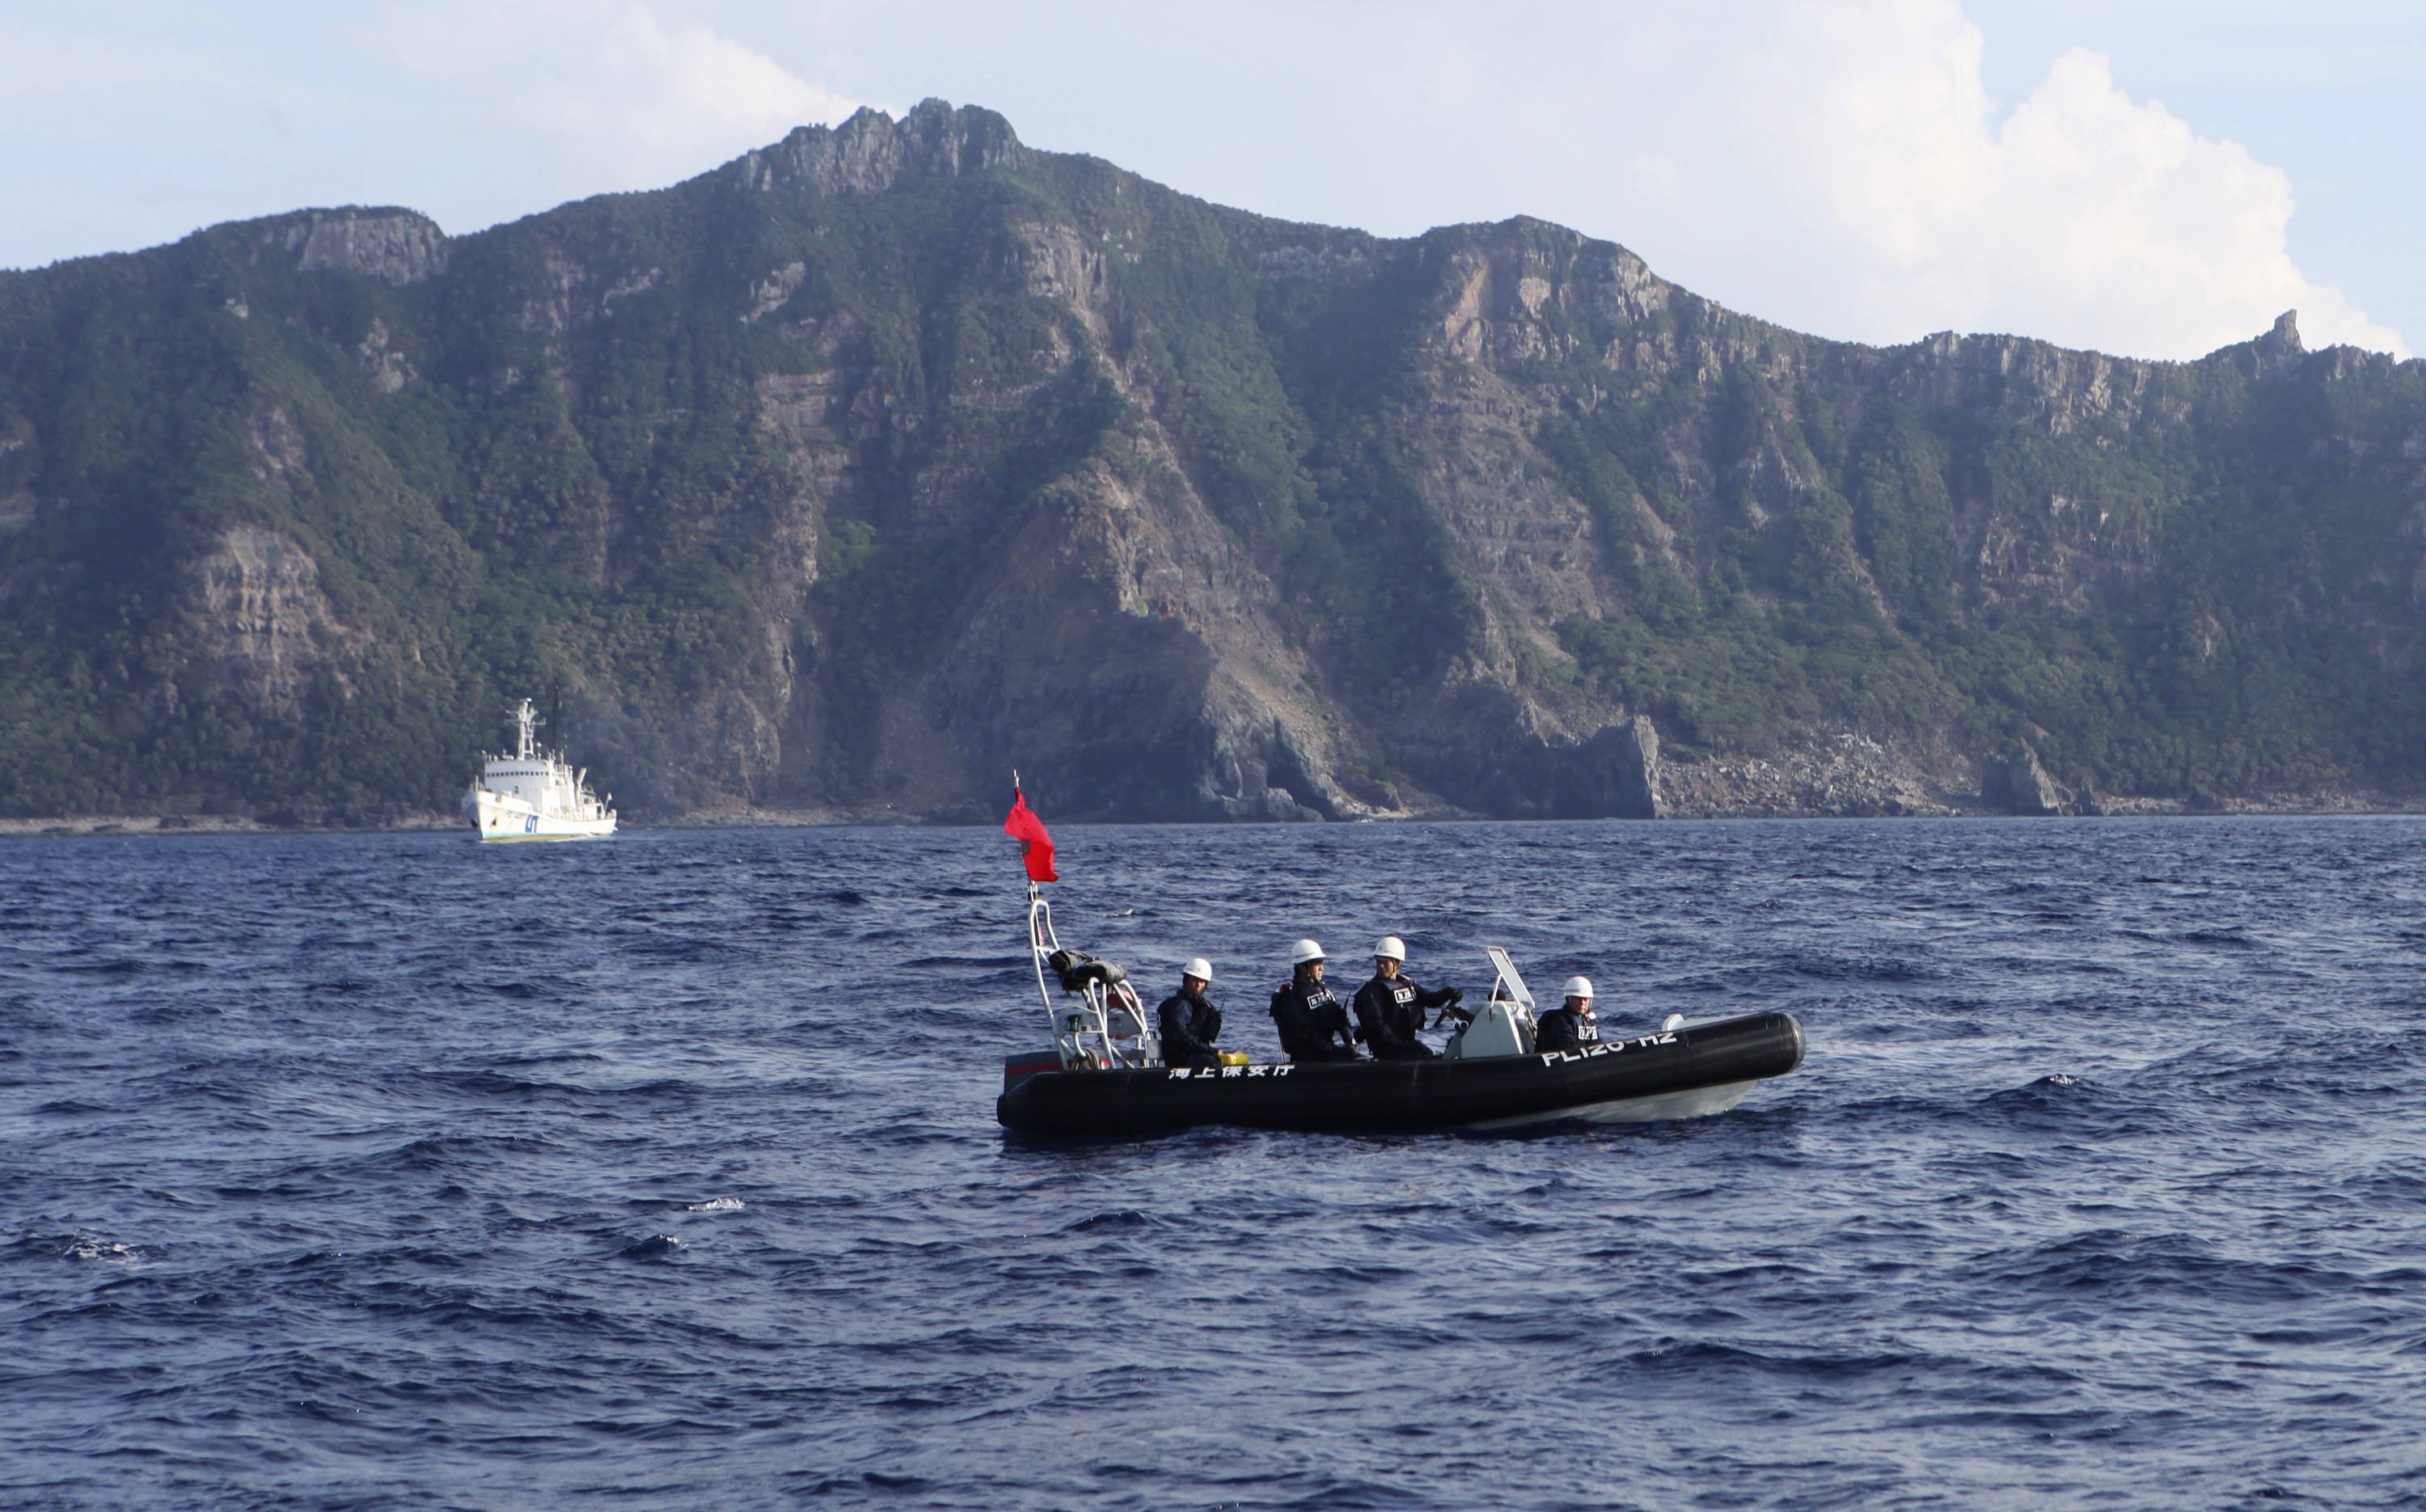 Protecting the waters around the Senkaku Islands has become a priority for Japan in the wake of China's adoption of its new coast guard law. | REUTERS